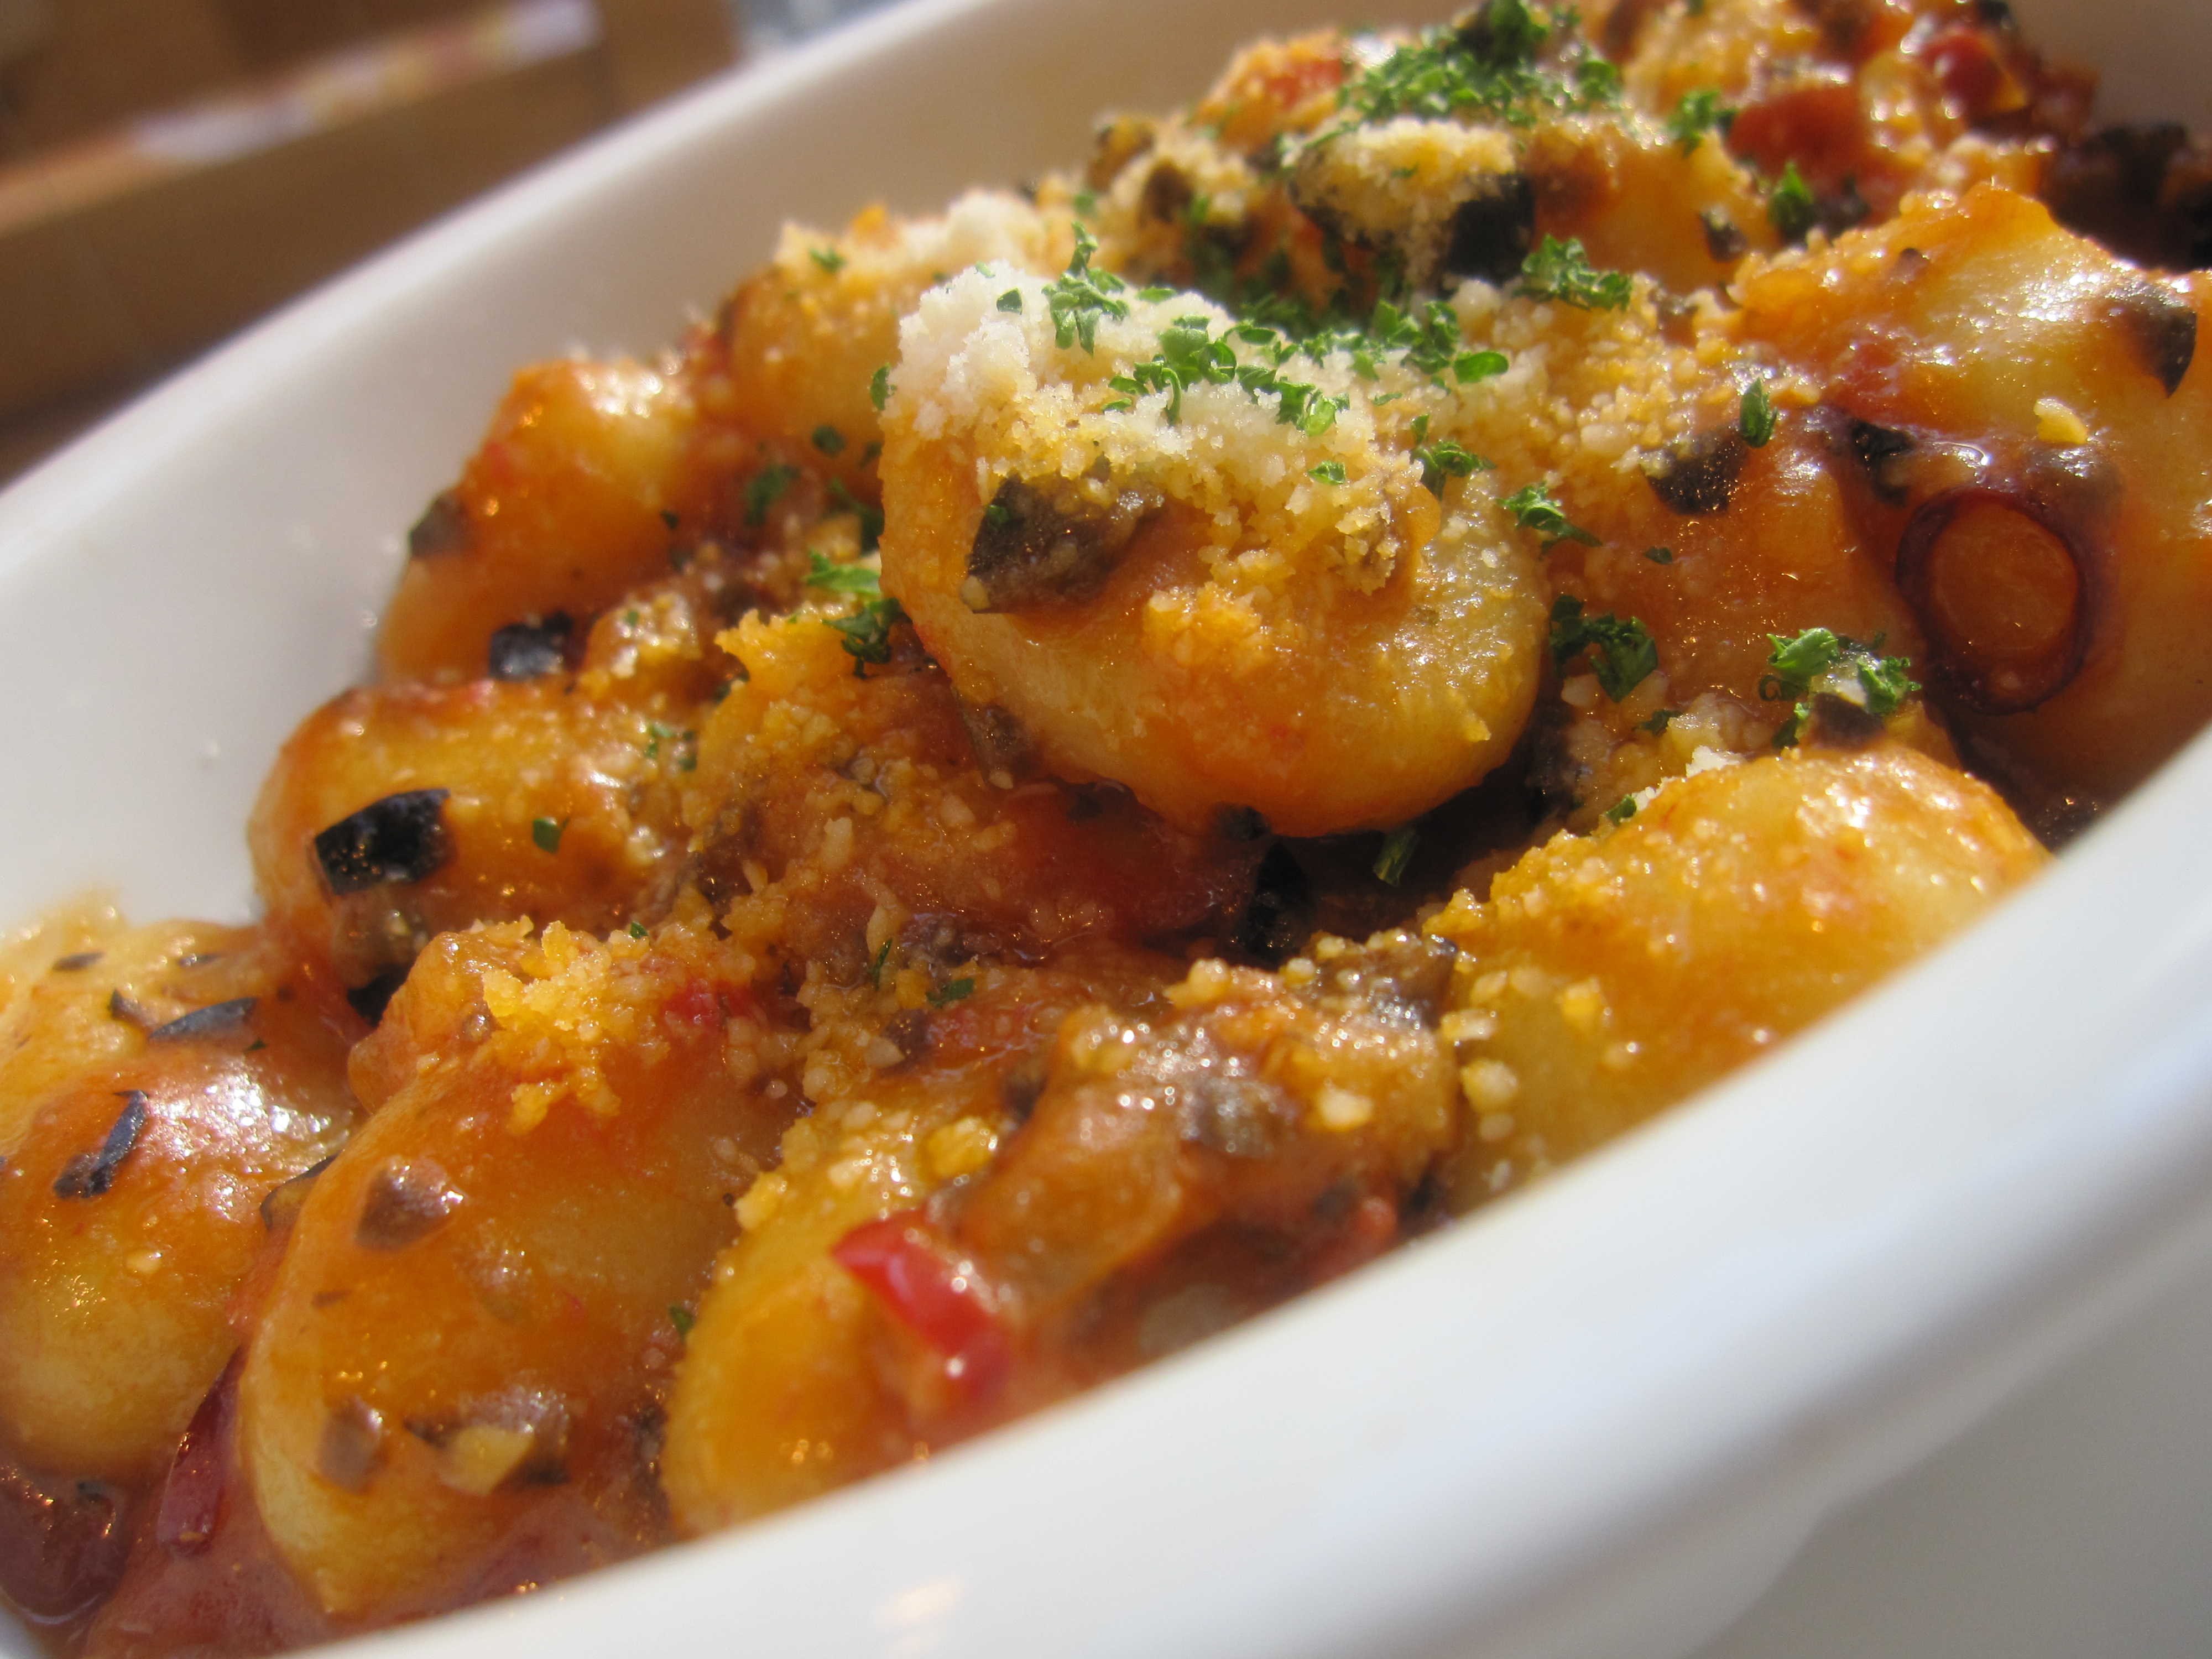 Gnocchi with black olive and tomato